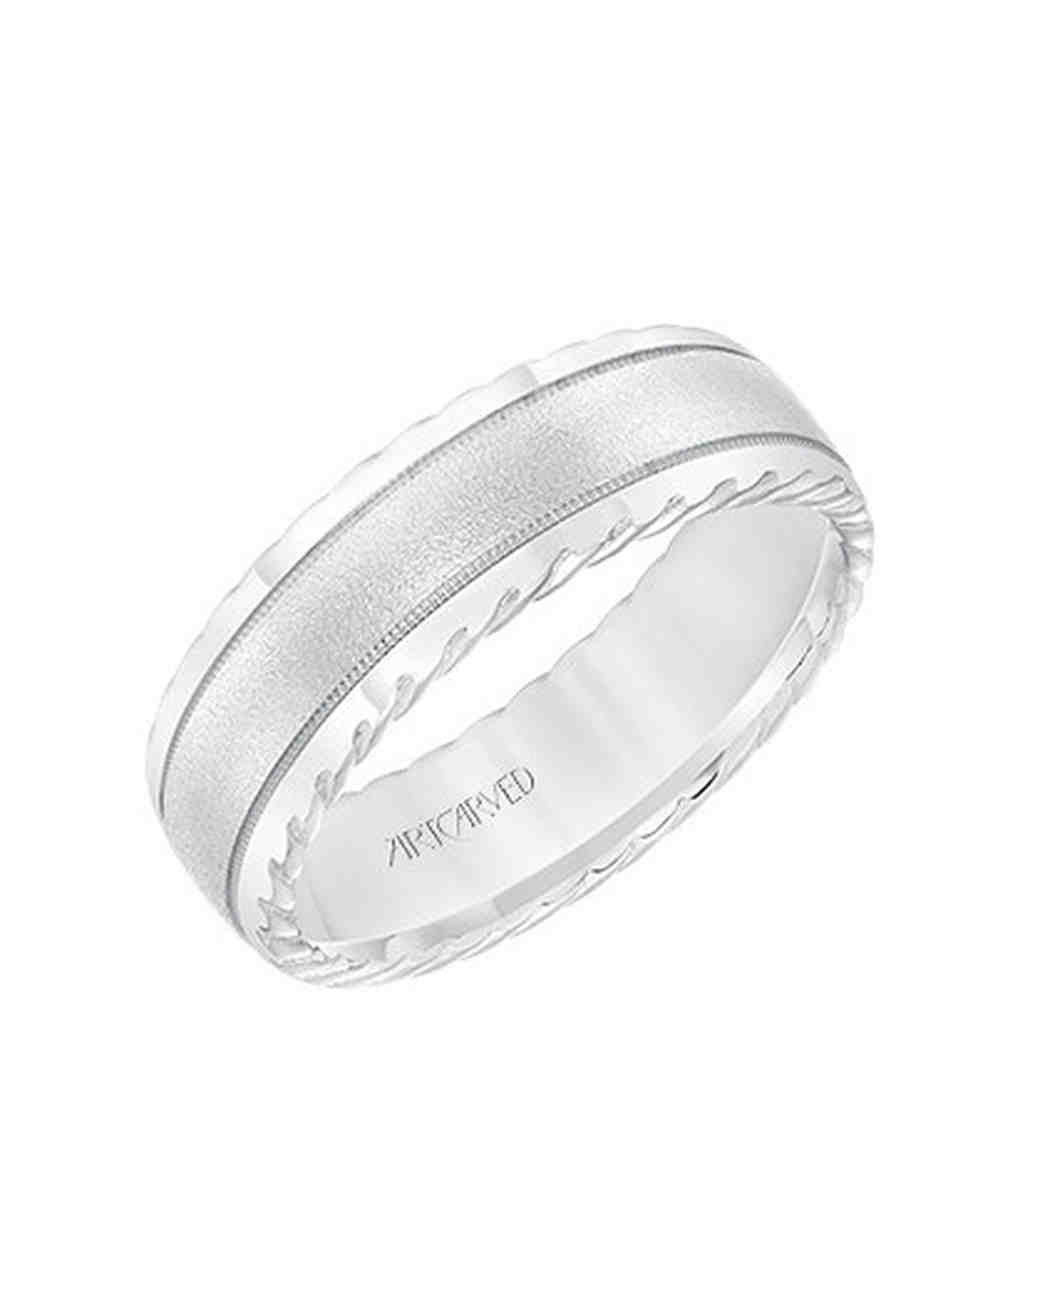 Groom Wedding Bands
 30 Classic Wedding Bands for the Groom